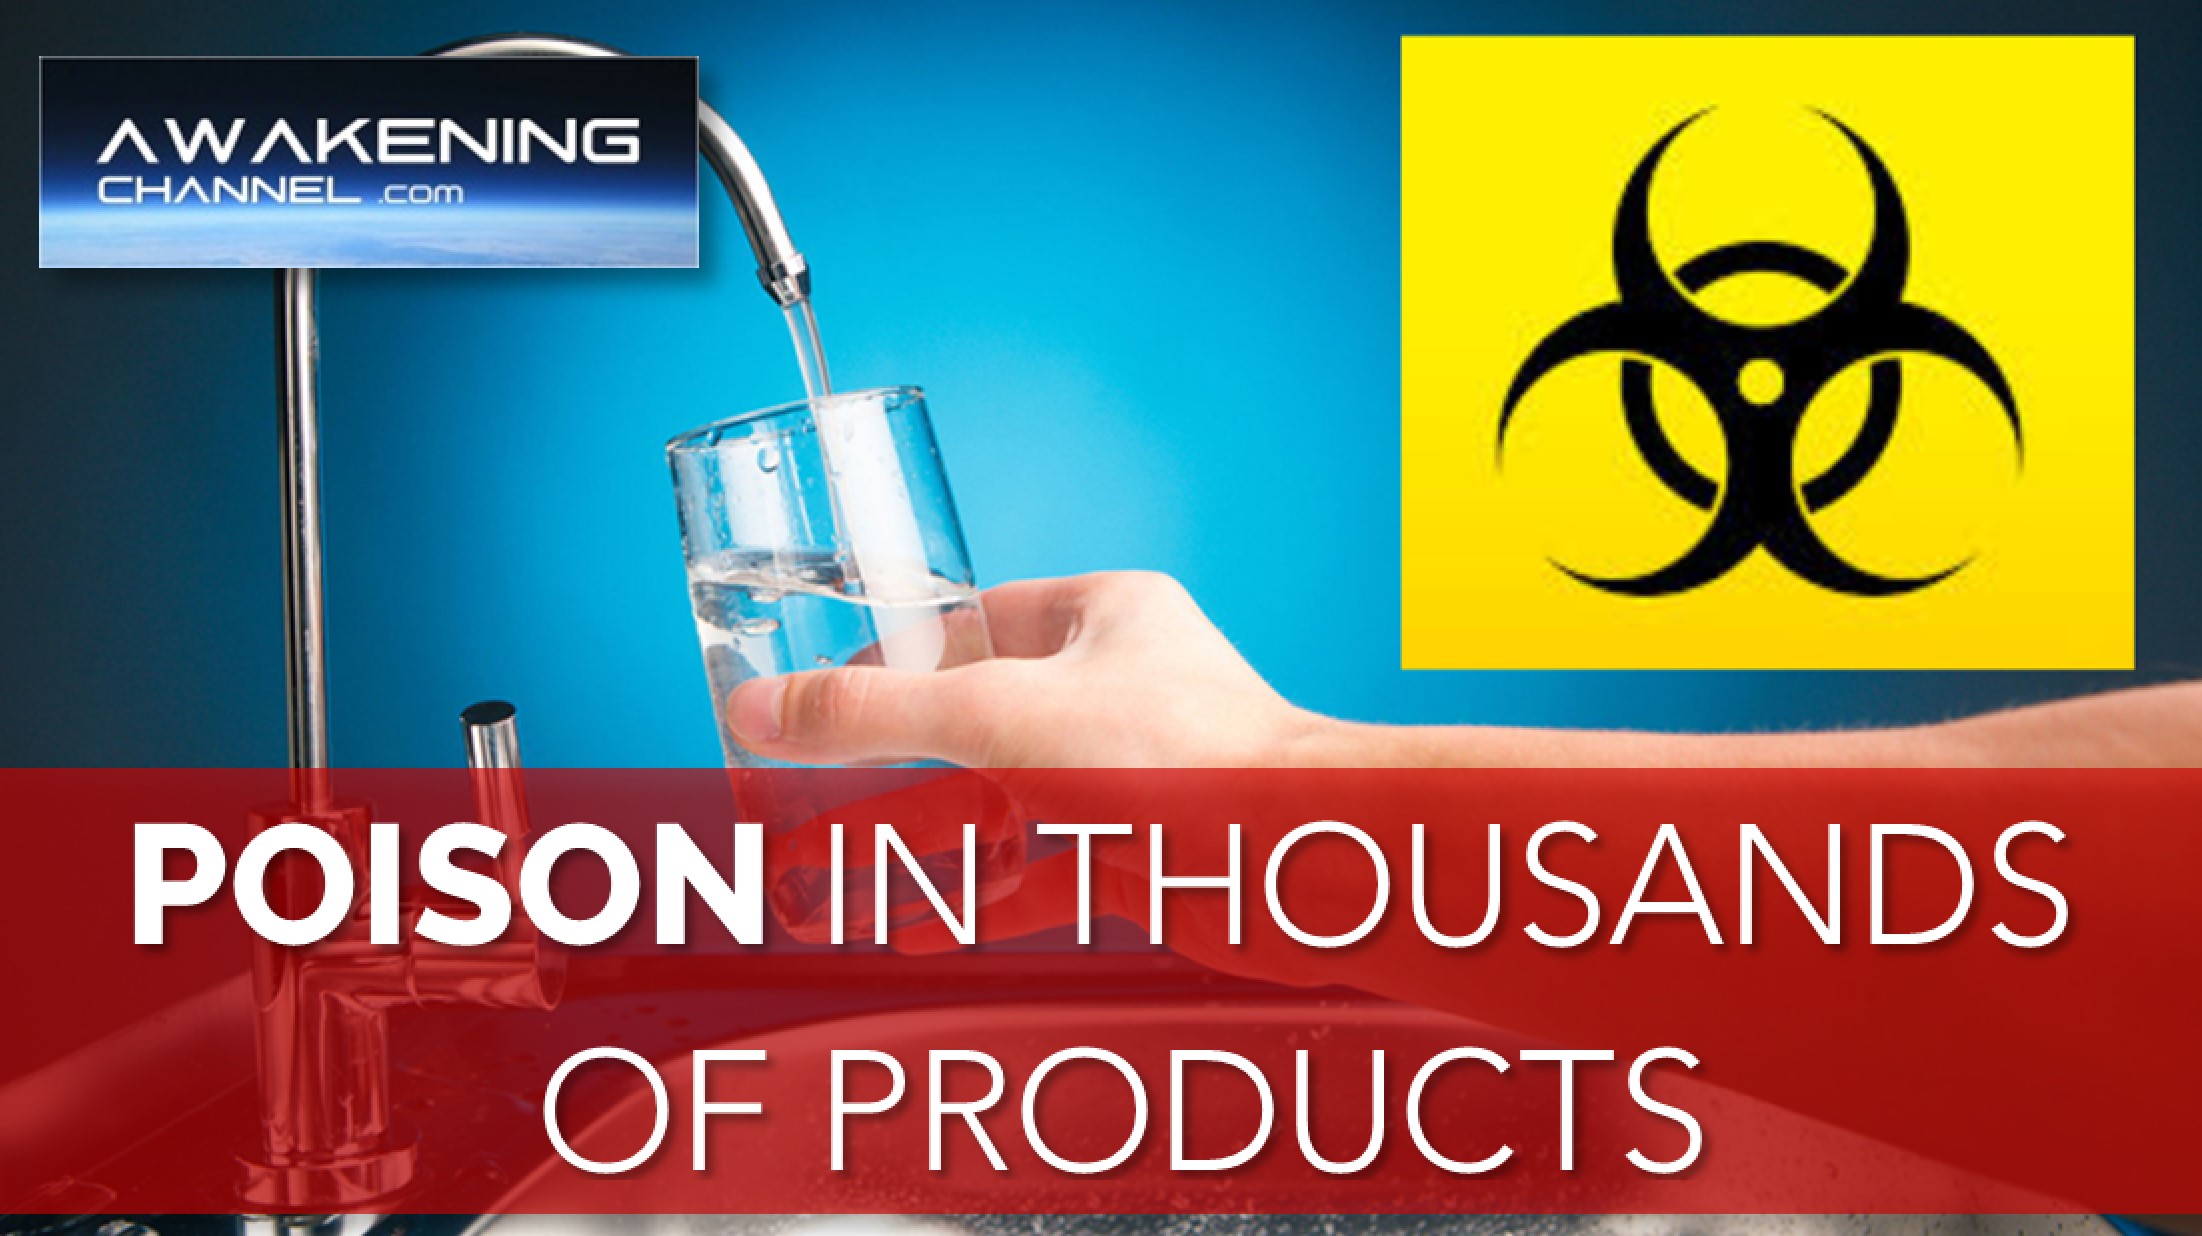 POISON On Tab & In Thousands of Products